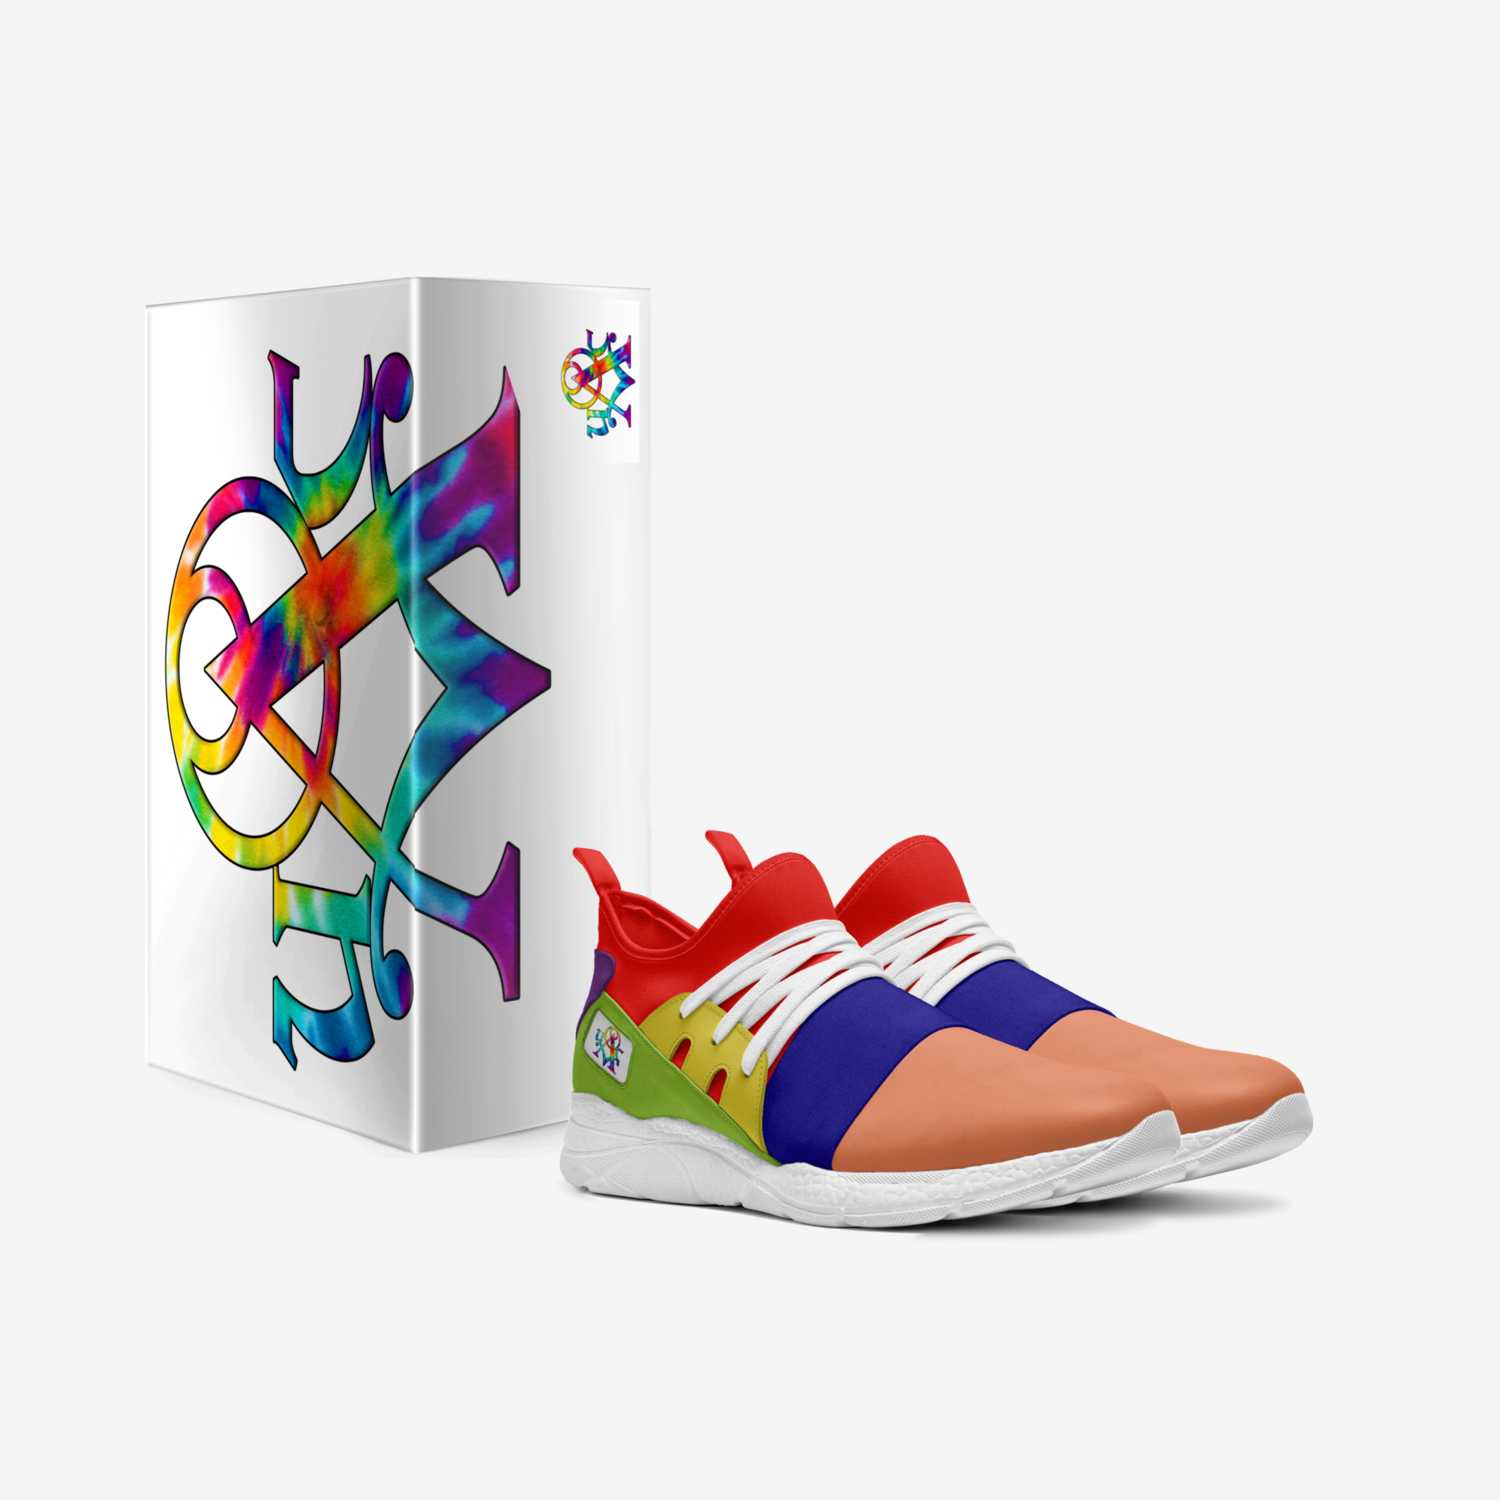 Alchemist Skittles custom made in Italy shoes by Urban Alchemist Clothing | Box view